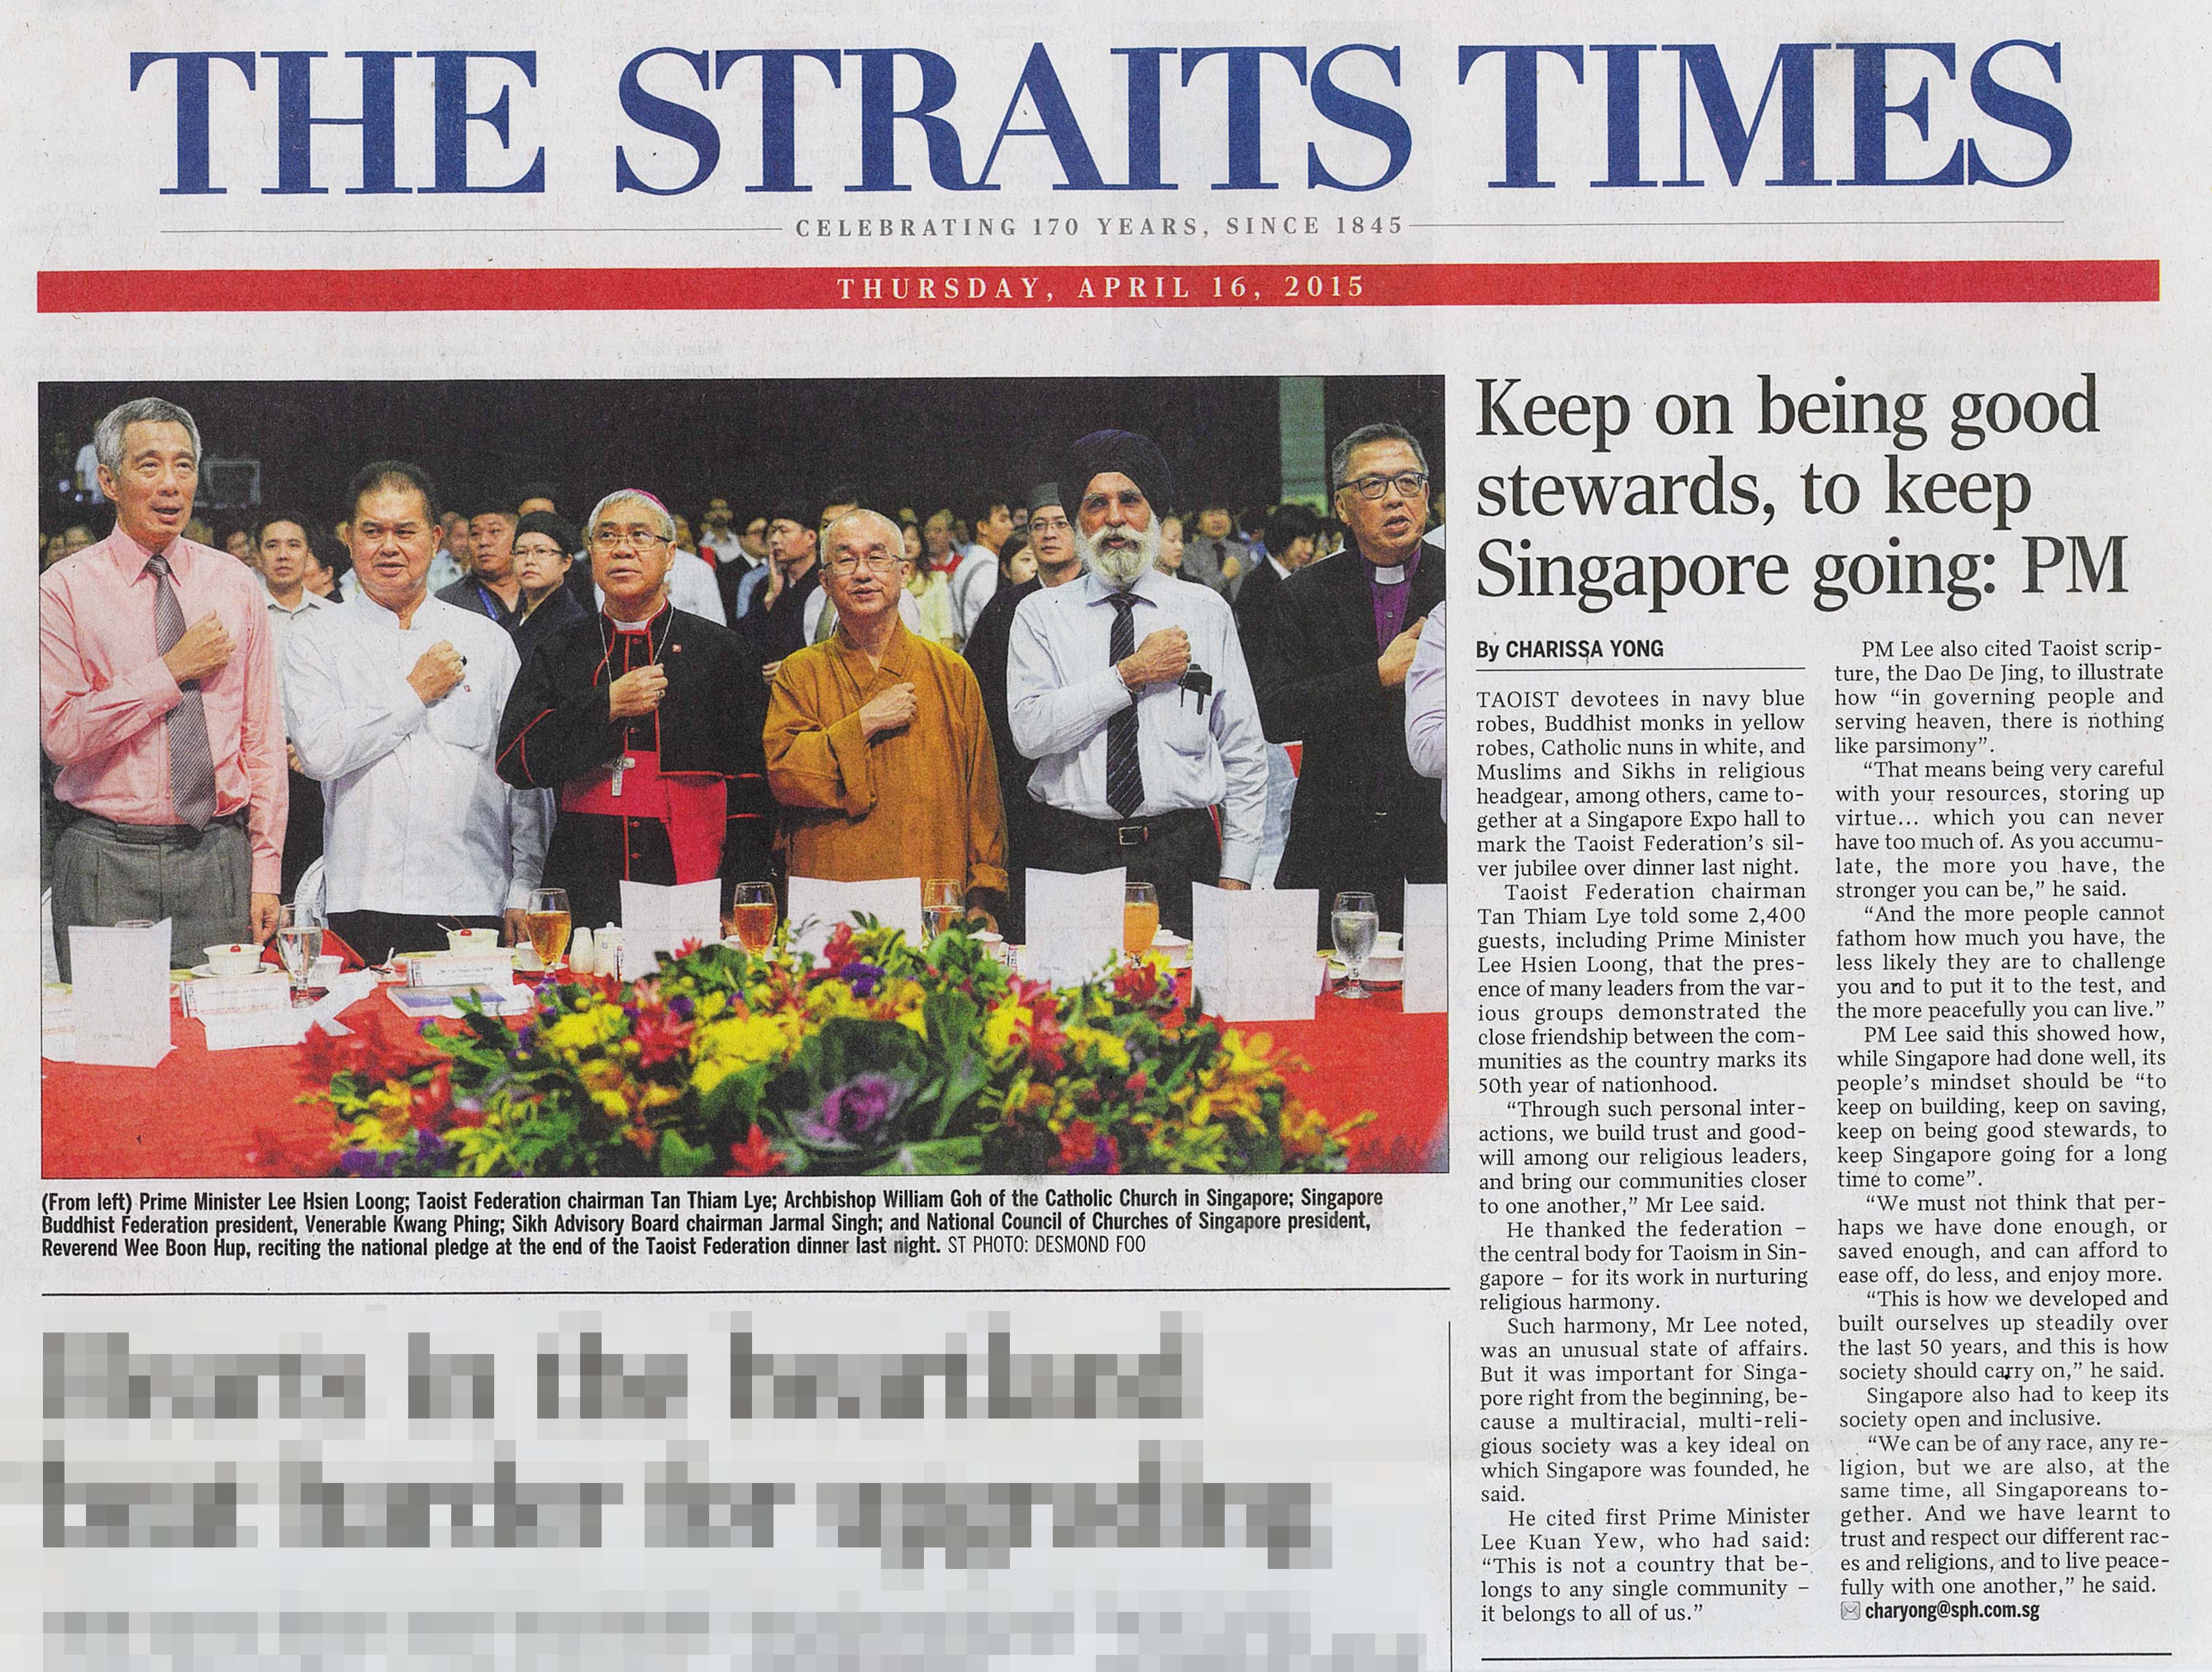 Keep on being good stewards, to keep Singapore going: PM